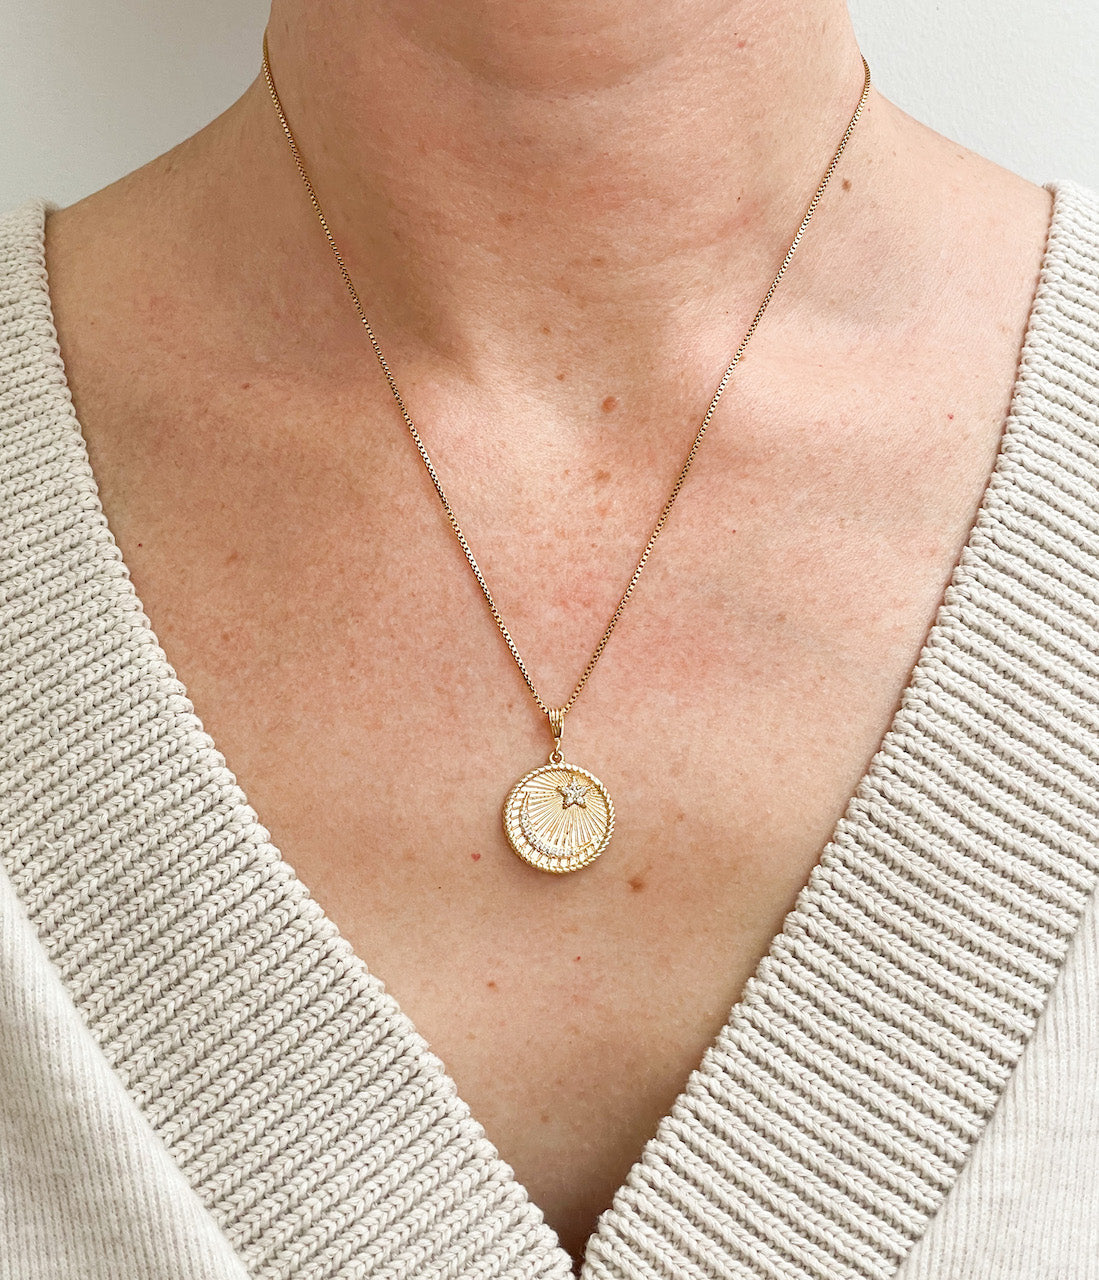 Celestial Coin pendant on a gold filled box chain necklace. Pendant has a crescent moon and star.